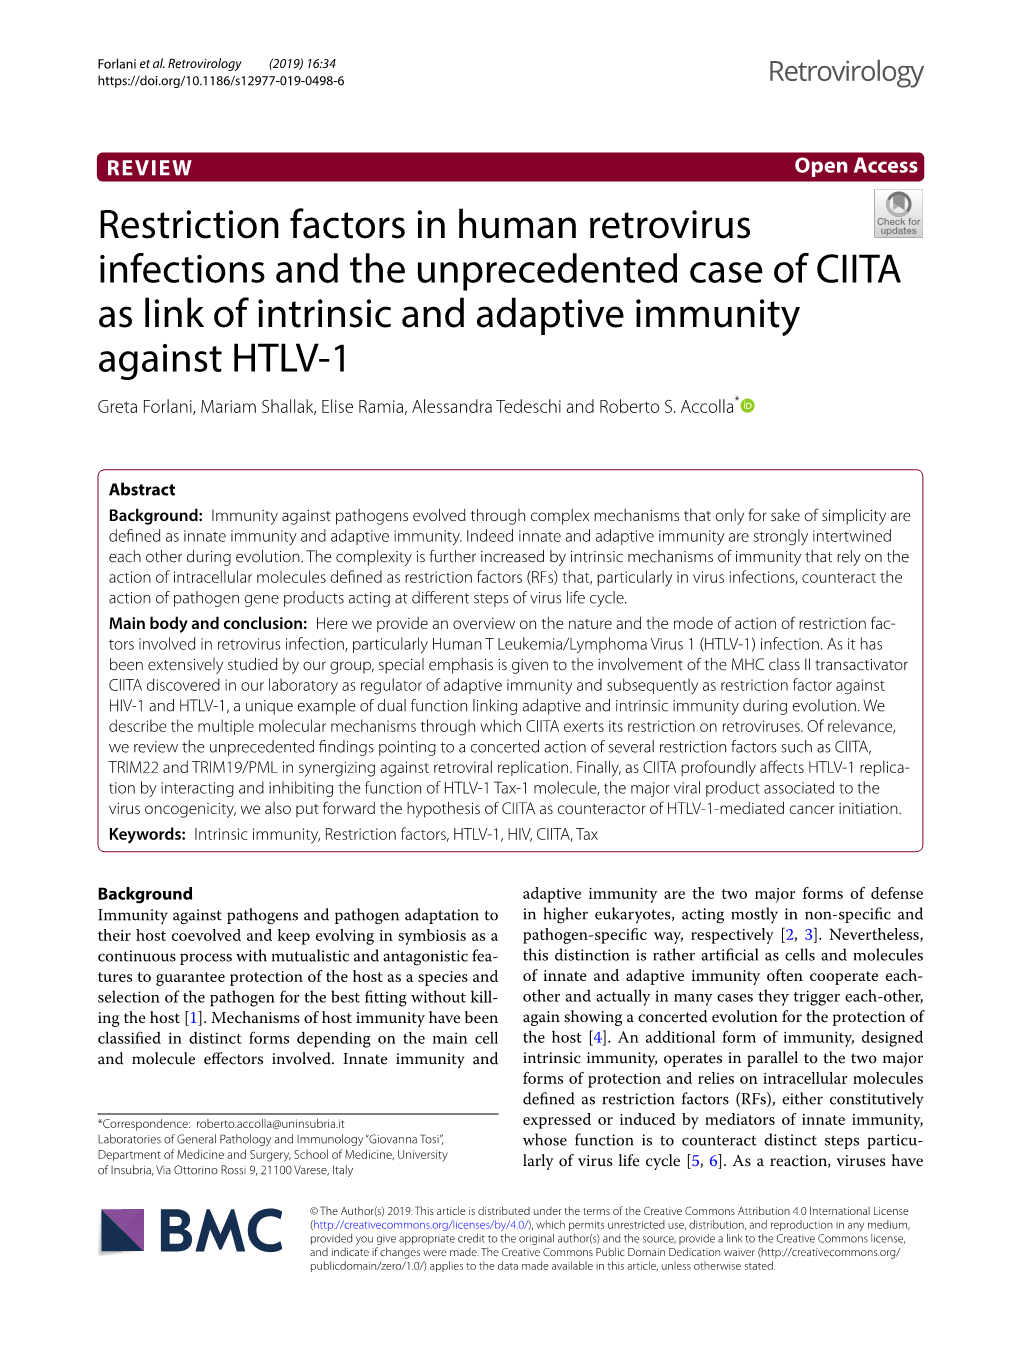 Restriction Factors in Human Retrovirus Infections and the Unprecedented